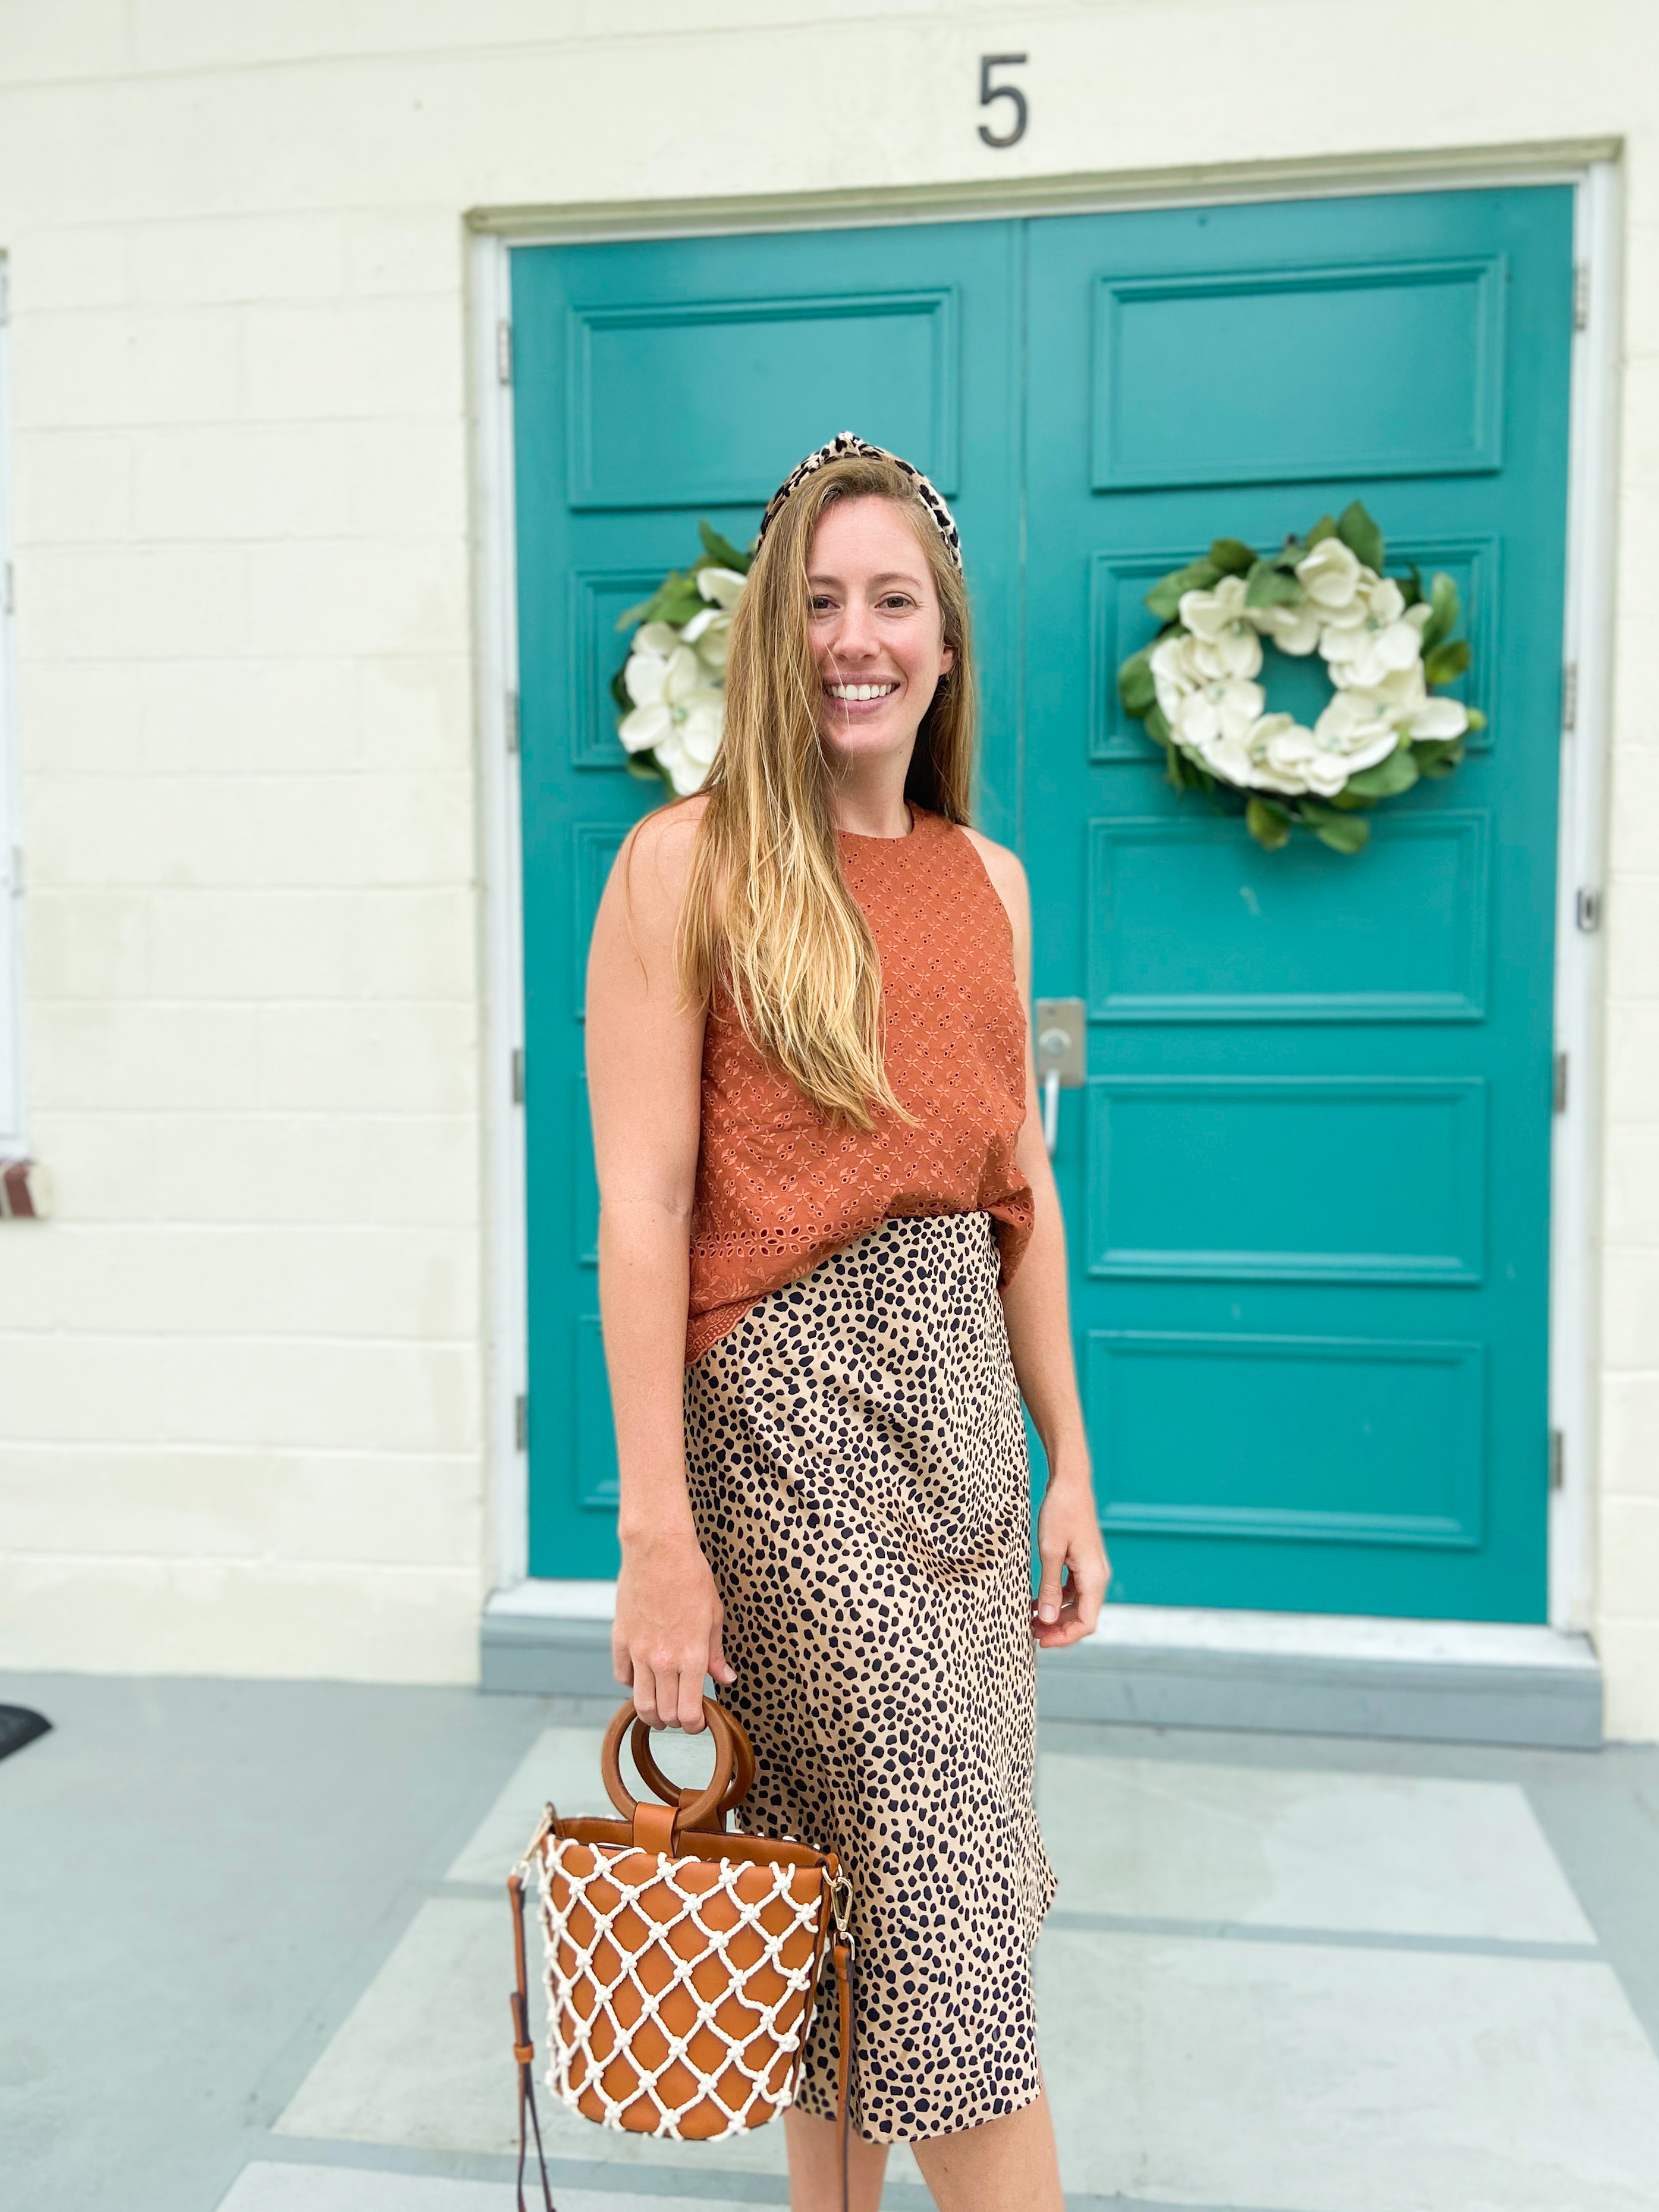 3 Ways to Style a Leopard Skirt for Fall / Warm Weather Fall Outfits / Fall Transition Outfits / Cute Fall Outfits / Modest Winter Outfits / Leopard Skirt Outfit Fall / Autumn Skirt Outfit - Sunshine Style, A Florida Fashion and Lifestyle Blog by Katie